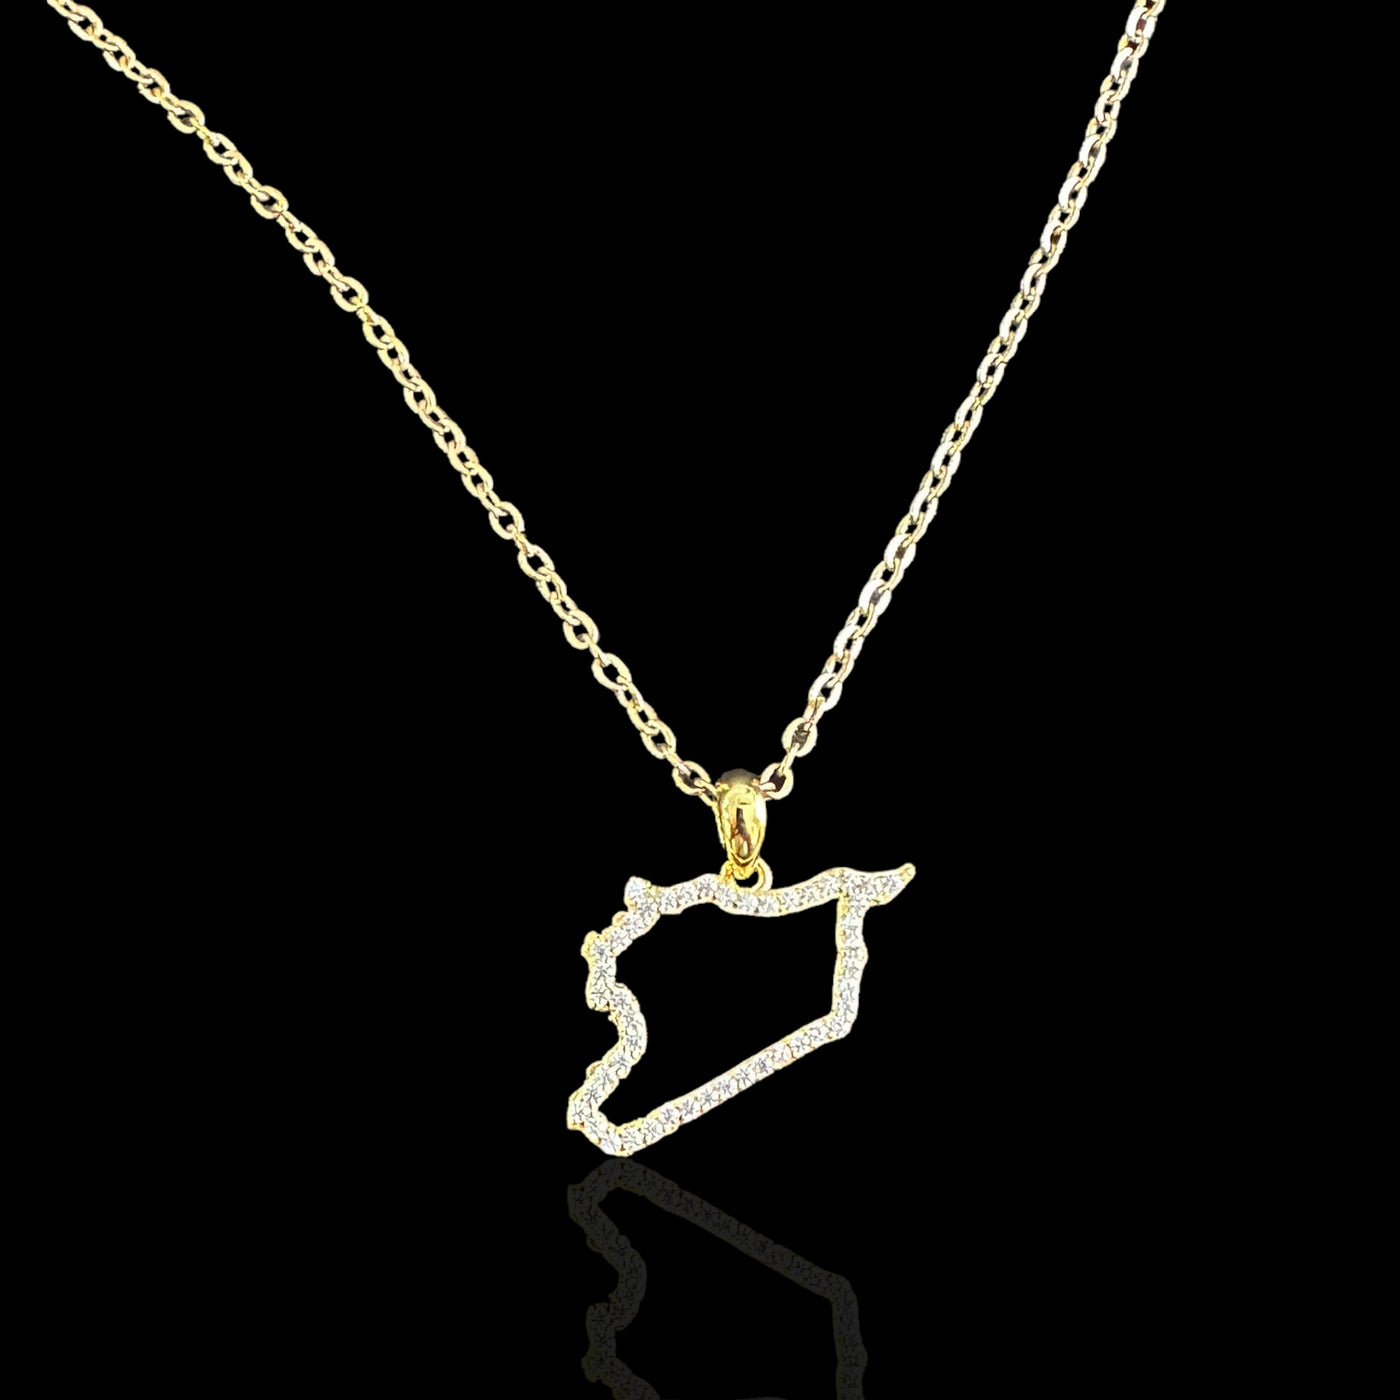 Sterling Silver Syria Map CZ Outline Necklace - Available in 3 Colors